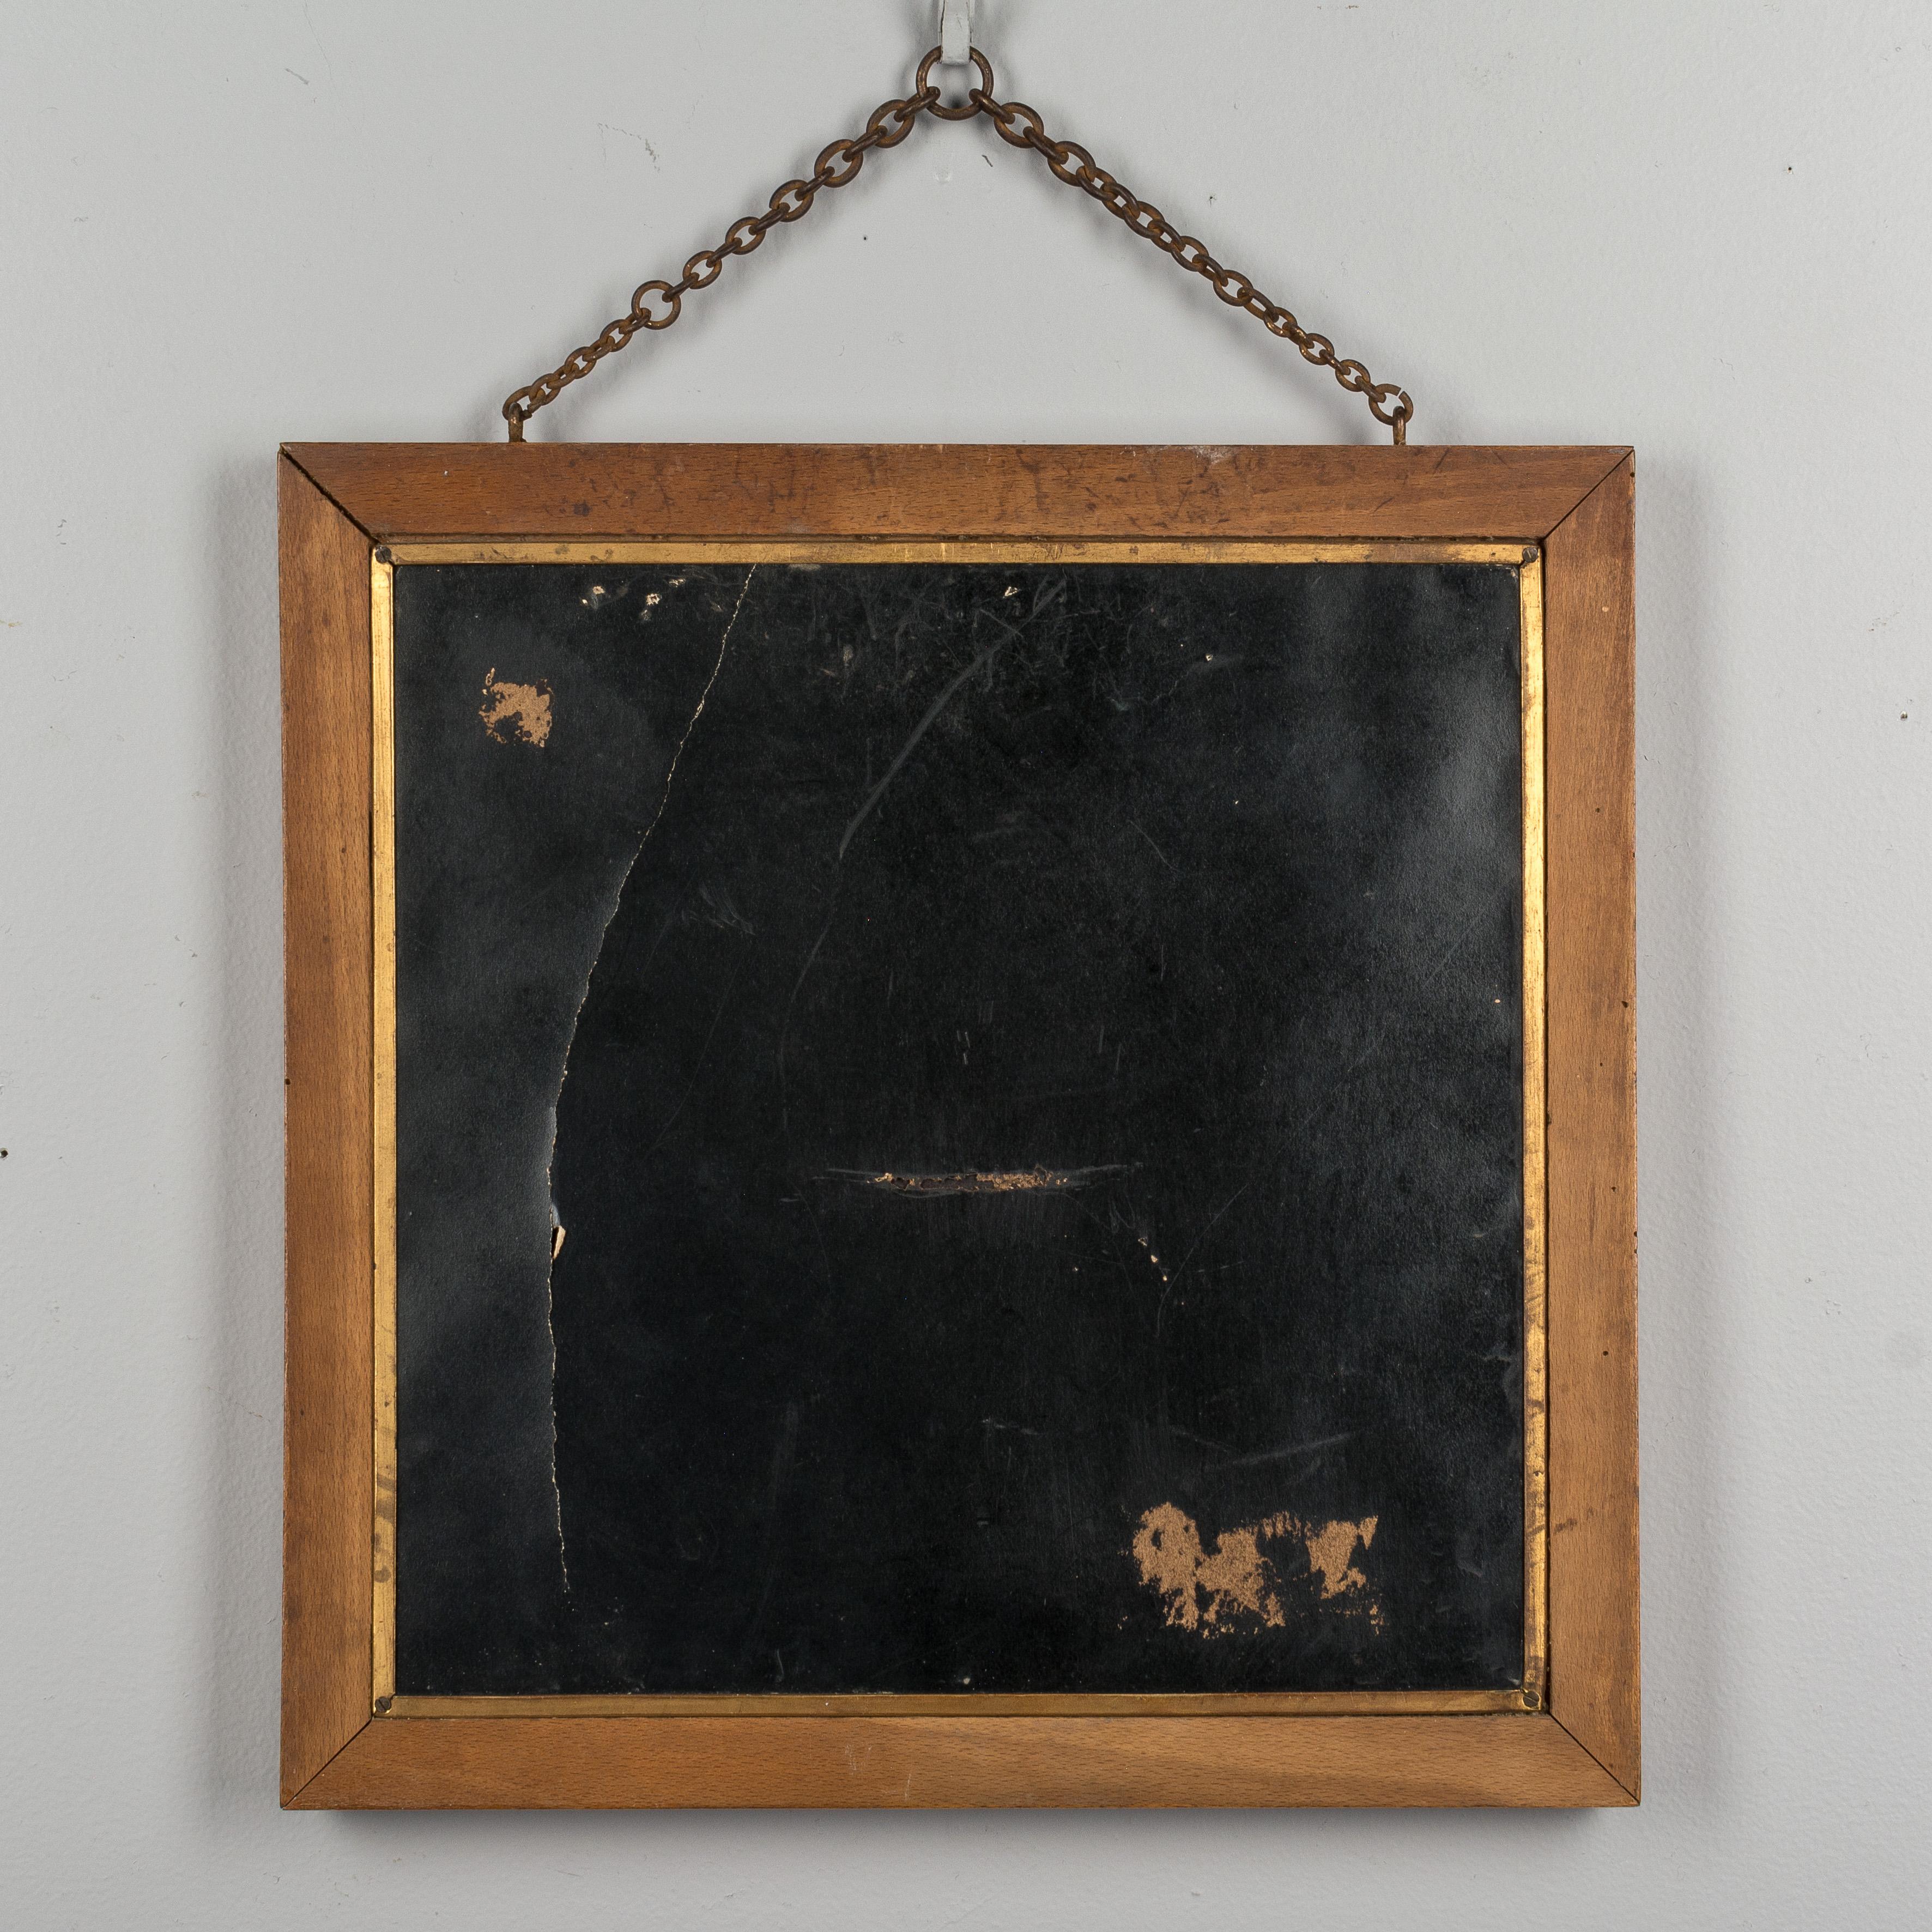 A 19th century French tri-fold shaving mirror with faux bamboo framed door panels made of beechwood and a small chain for hanging on the wall. The panels are faced with decorative Japanese paper prints depicting two figures and a pair of cranes.